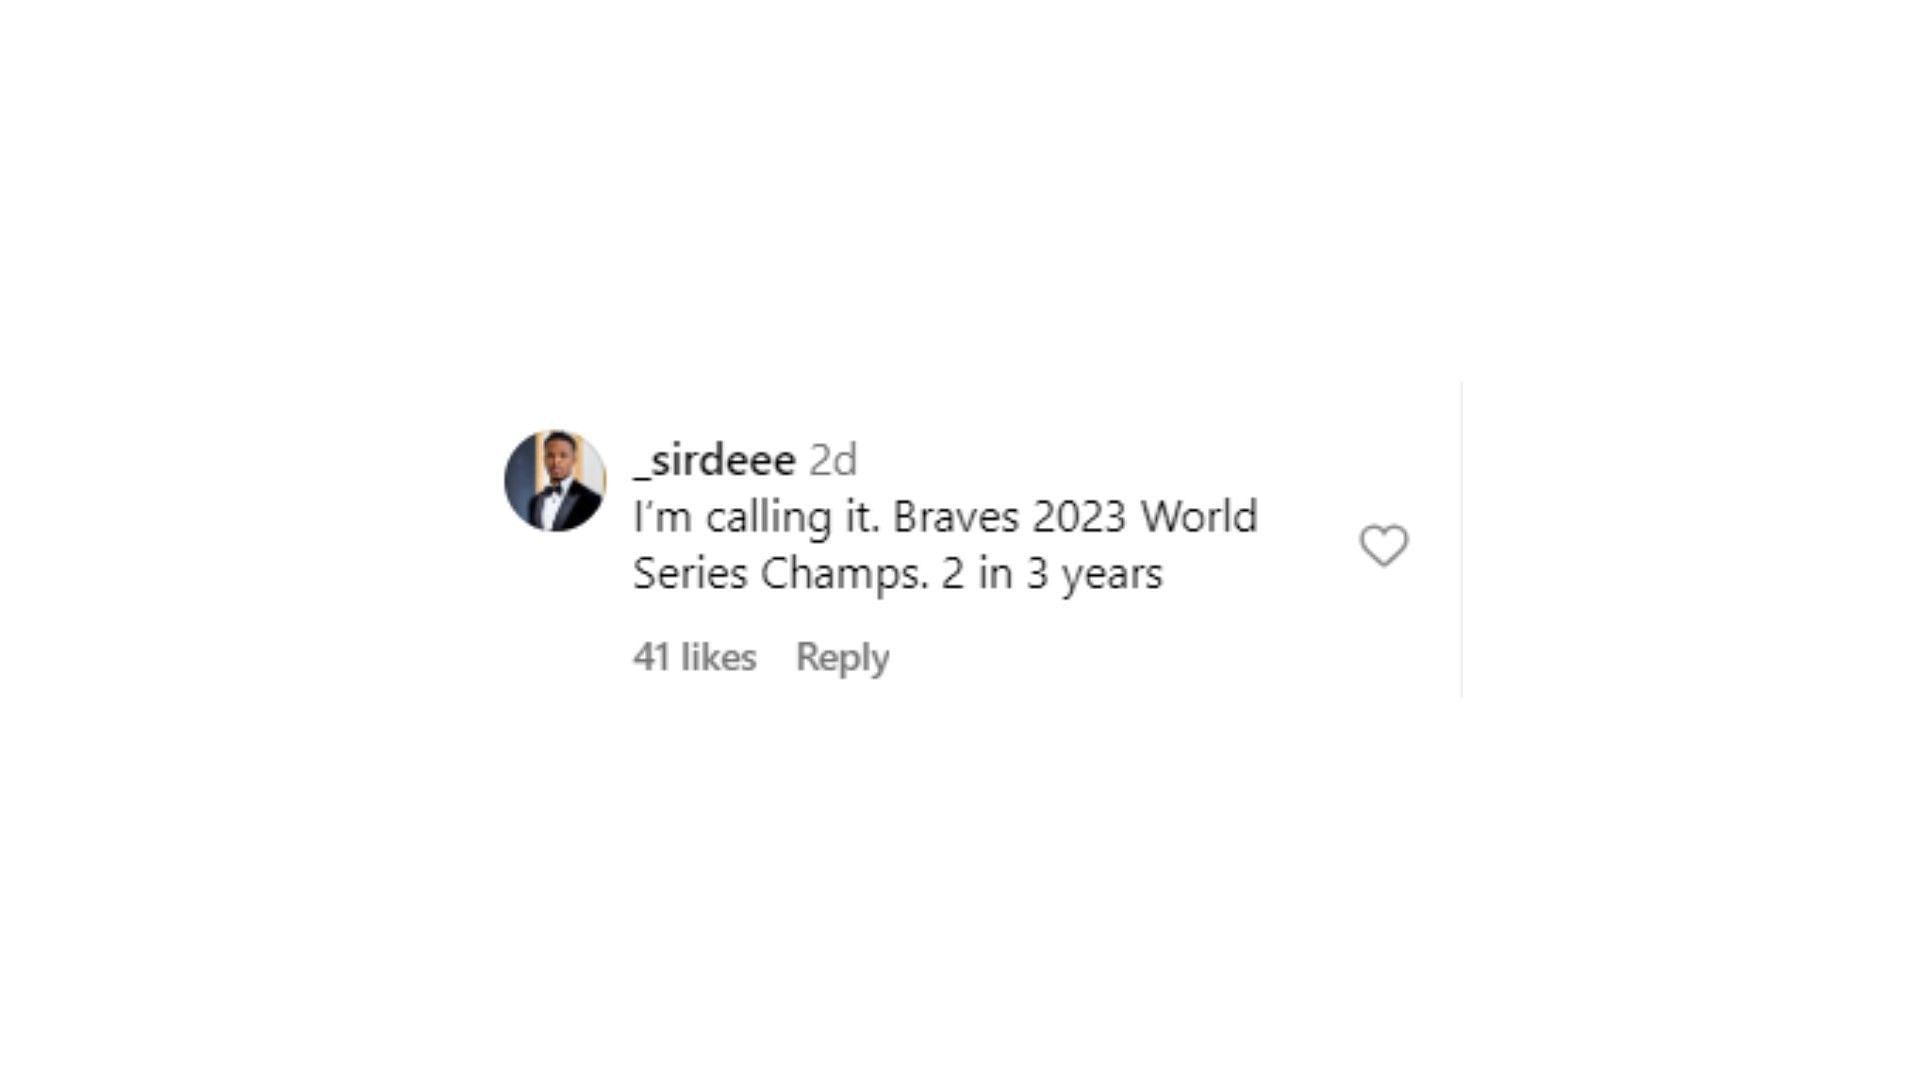 &quot;I&rsquo;m calling it. Braves 2023 World Series Champs. 2 in 3 years&quot; - _sirdeee, Instagram.